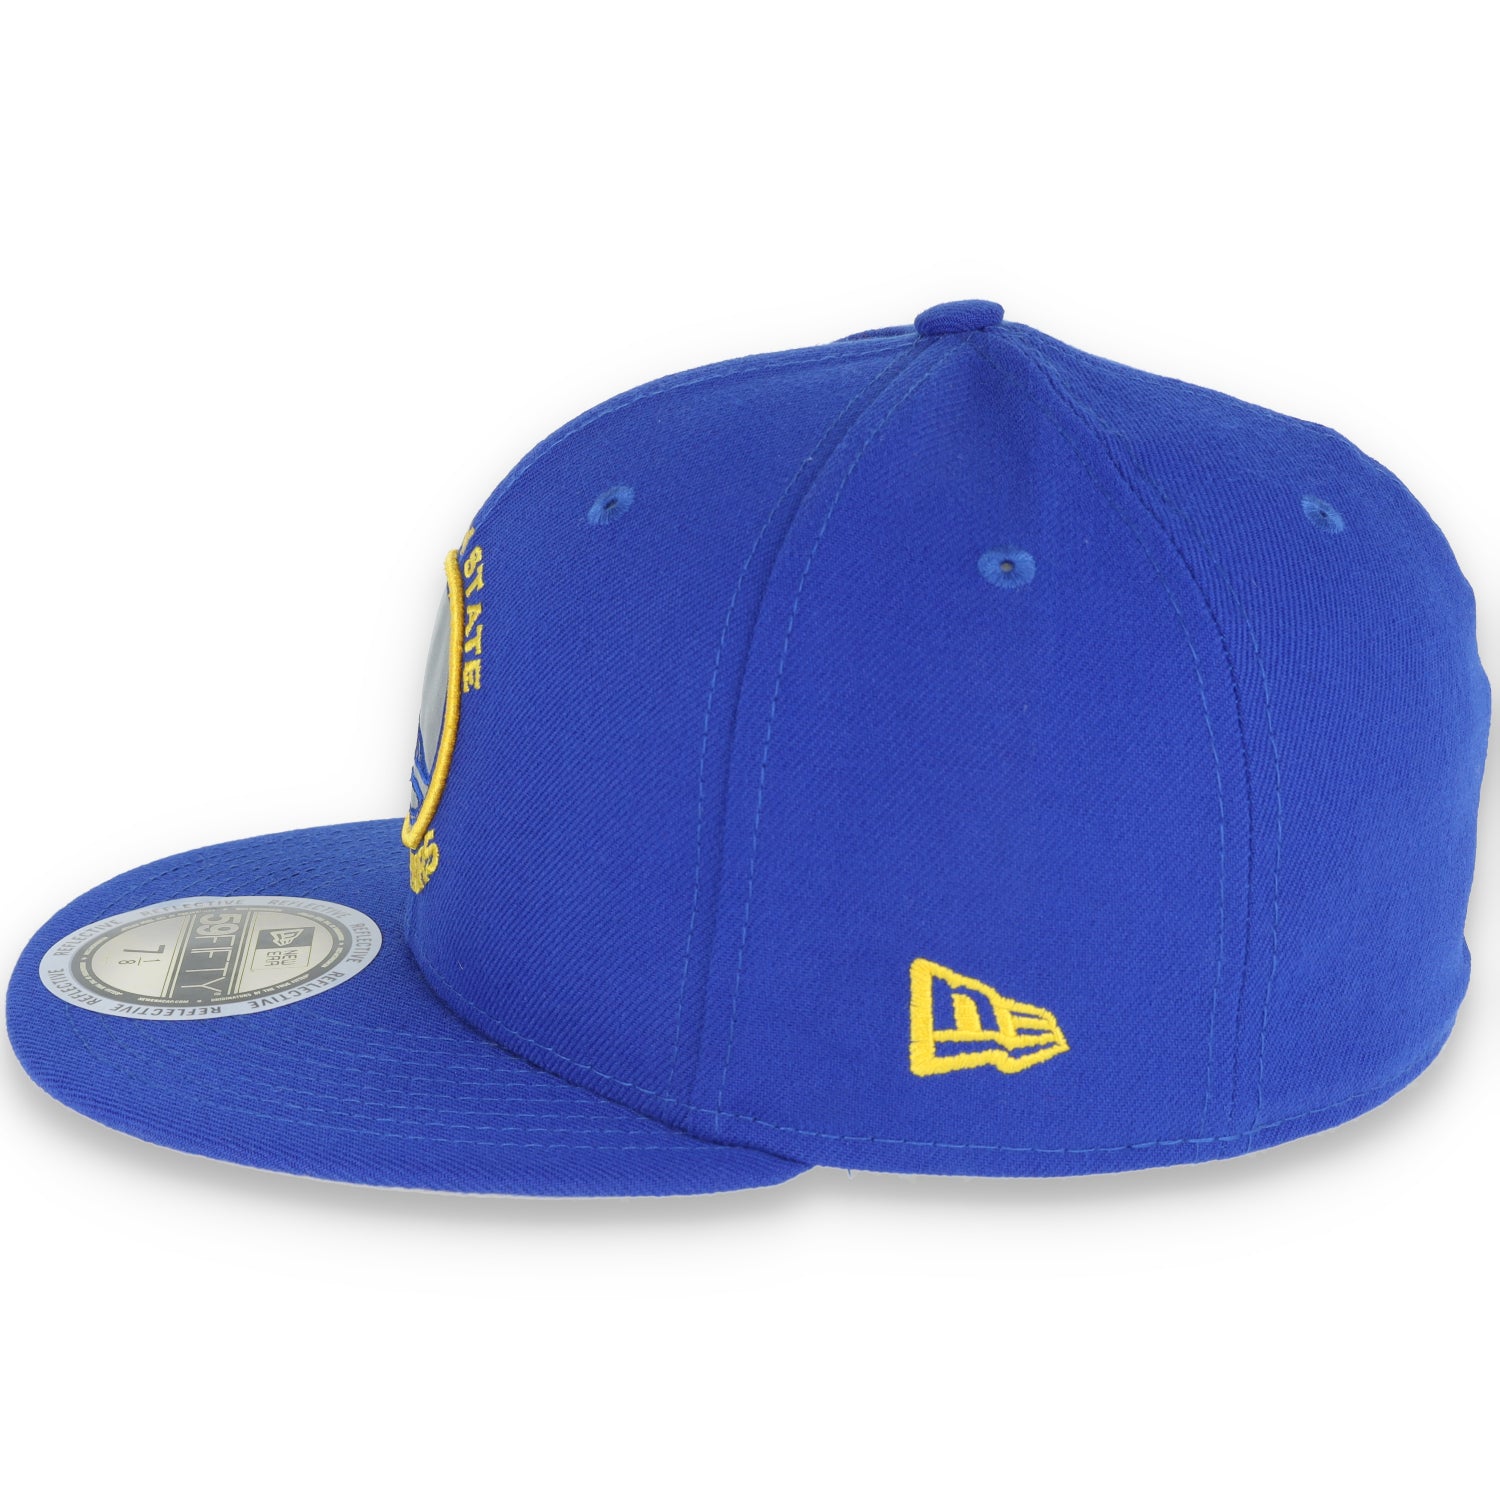 GOLDEN STATE WARRIORS REFLECTIVE BASIC 59FIFTY HAT-ROYAL BLUE